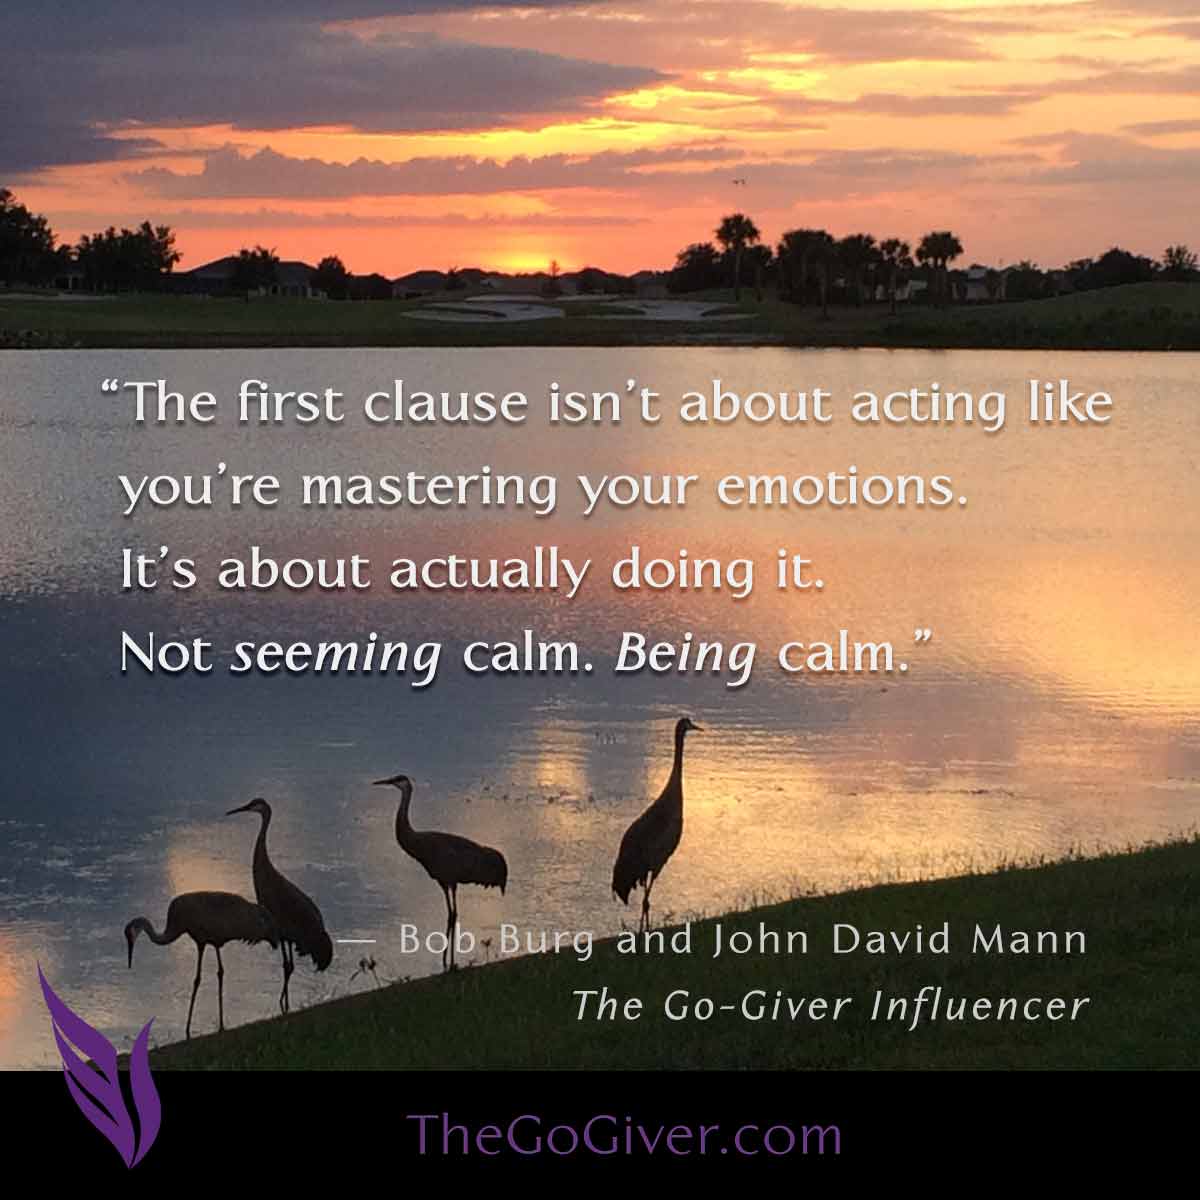 The first clause isn't about acting like you're mastering your emotions. It's about actually doing it. Not seeming calm. Being calm.